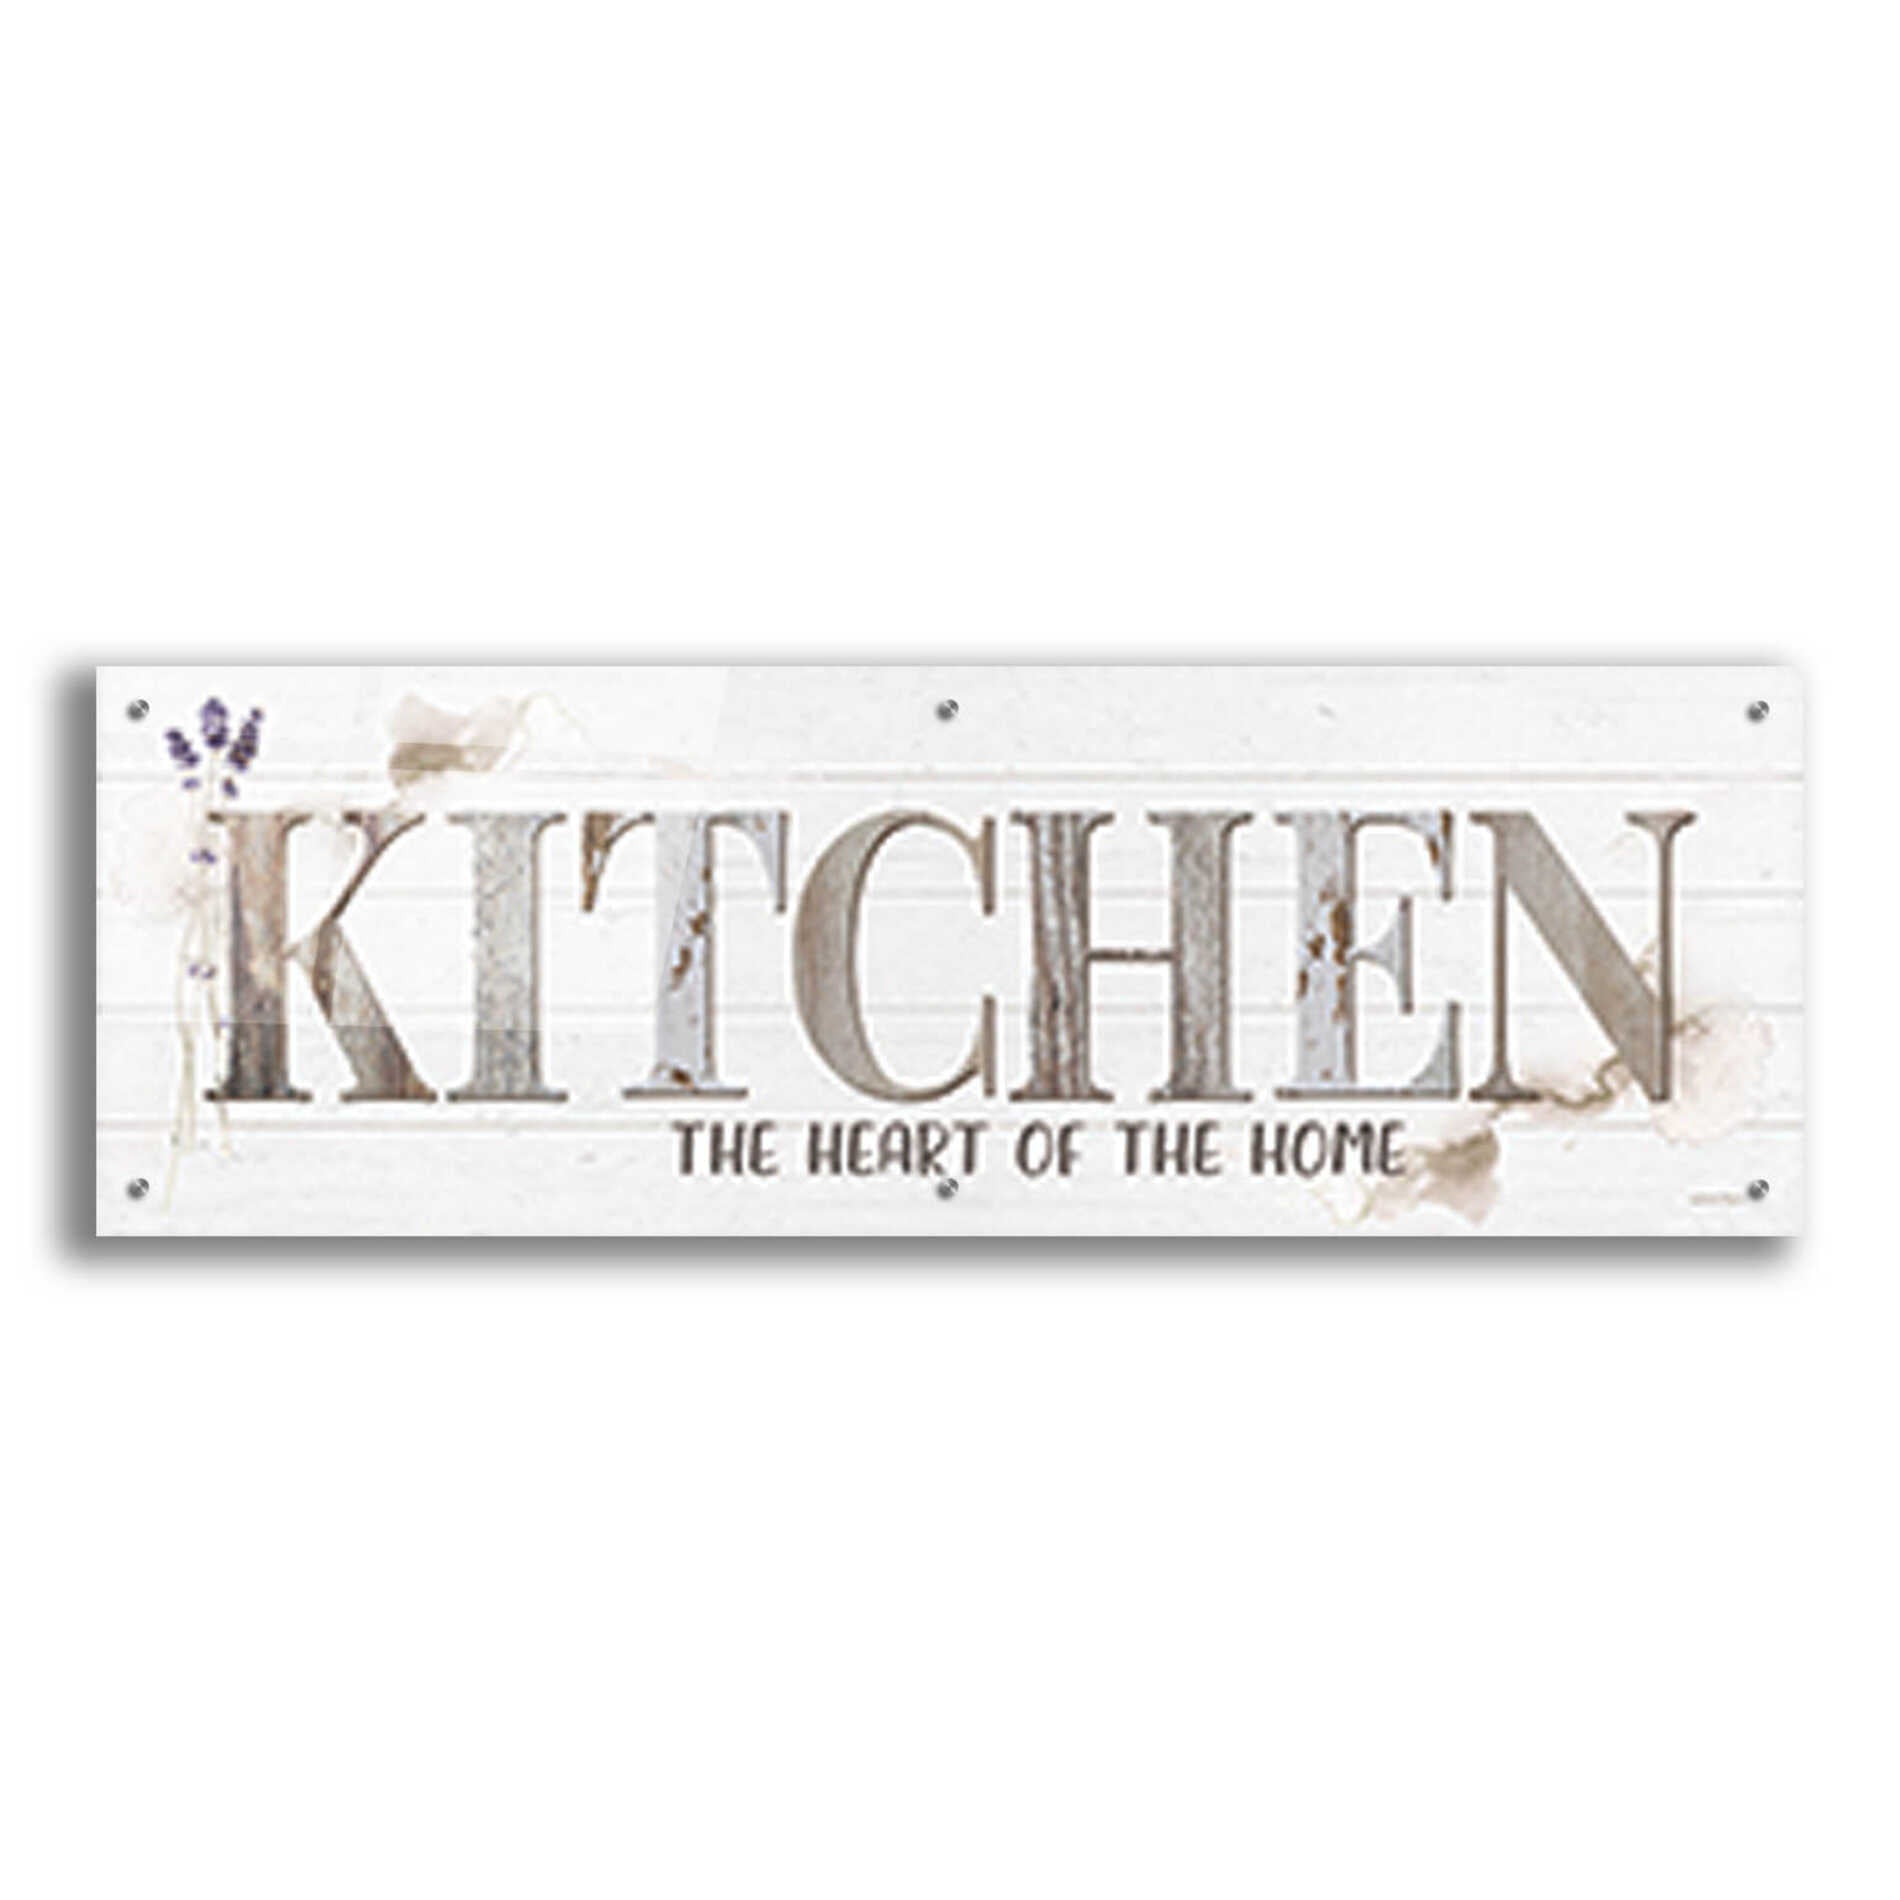 Epic Art 'Kitchen the Heart of the Home' by Susie Boyer, Acrylic Glass Wall Art,48x16